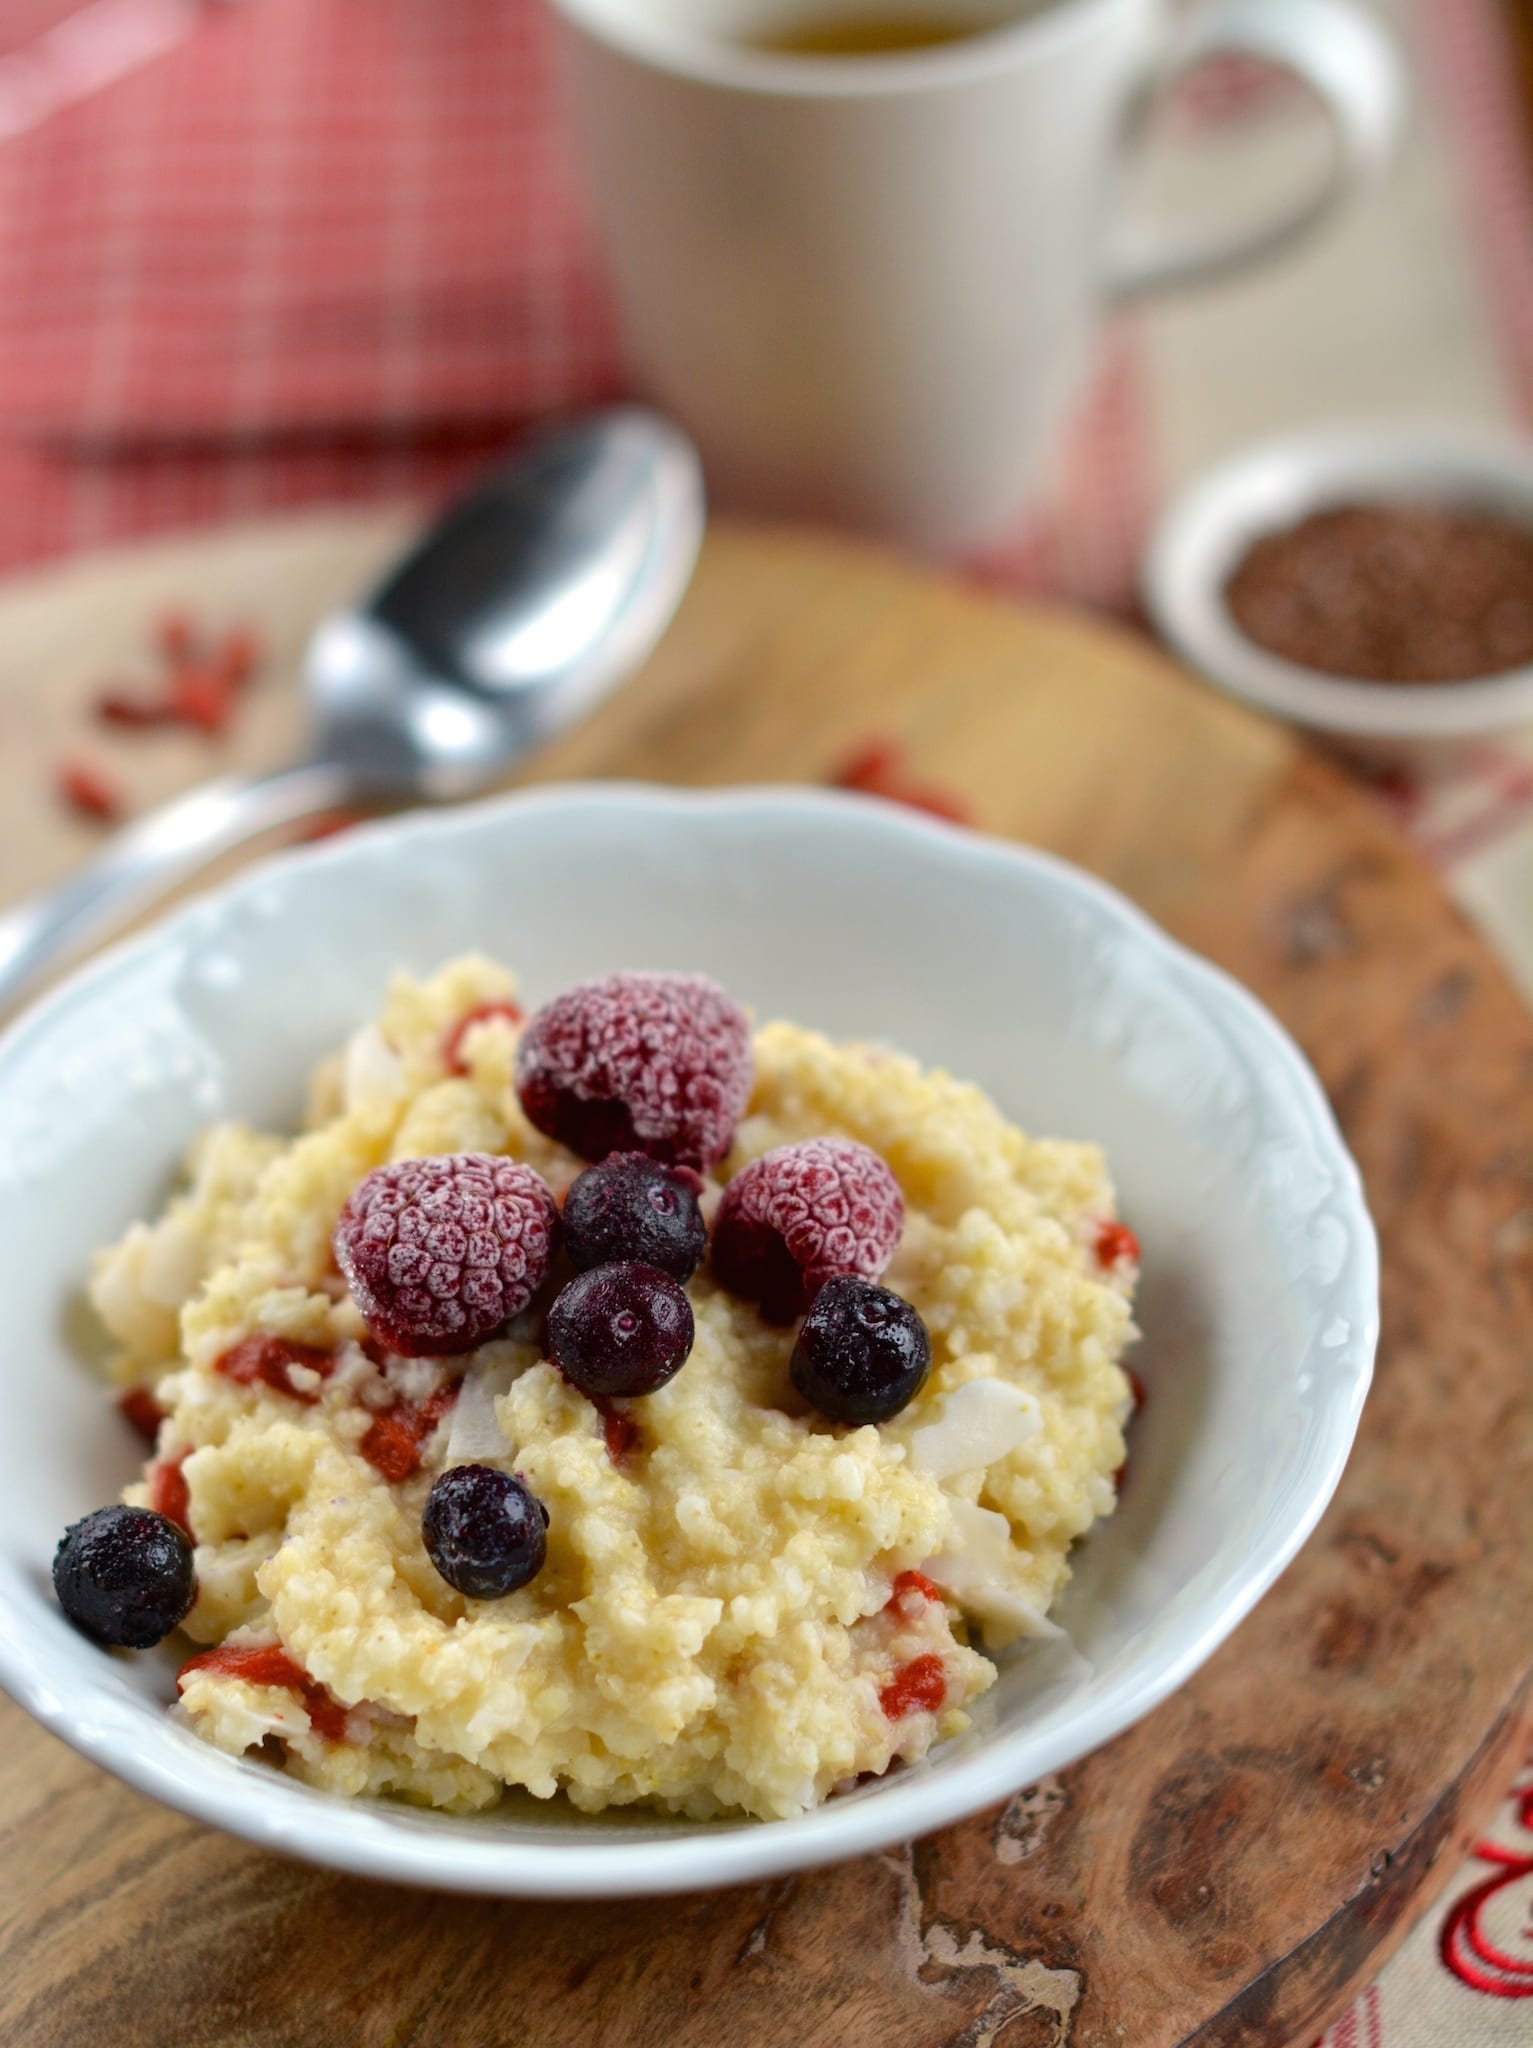 Millet with Blueberries and Raspberries